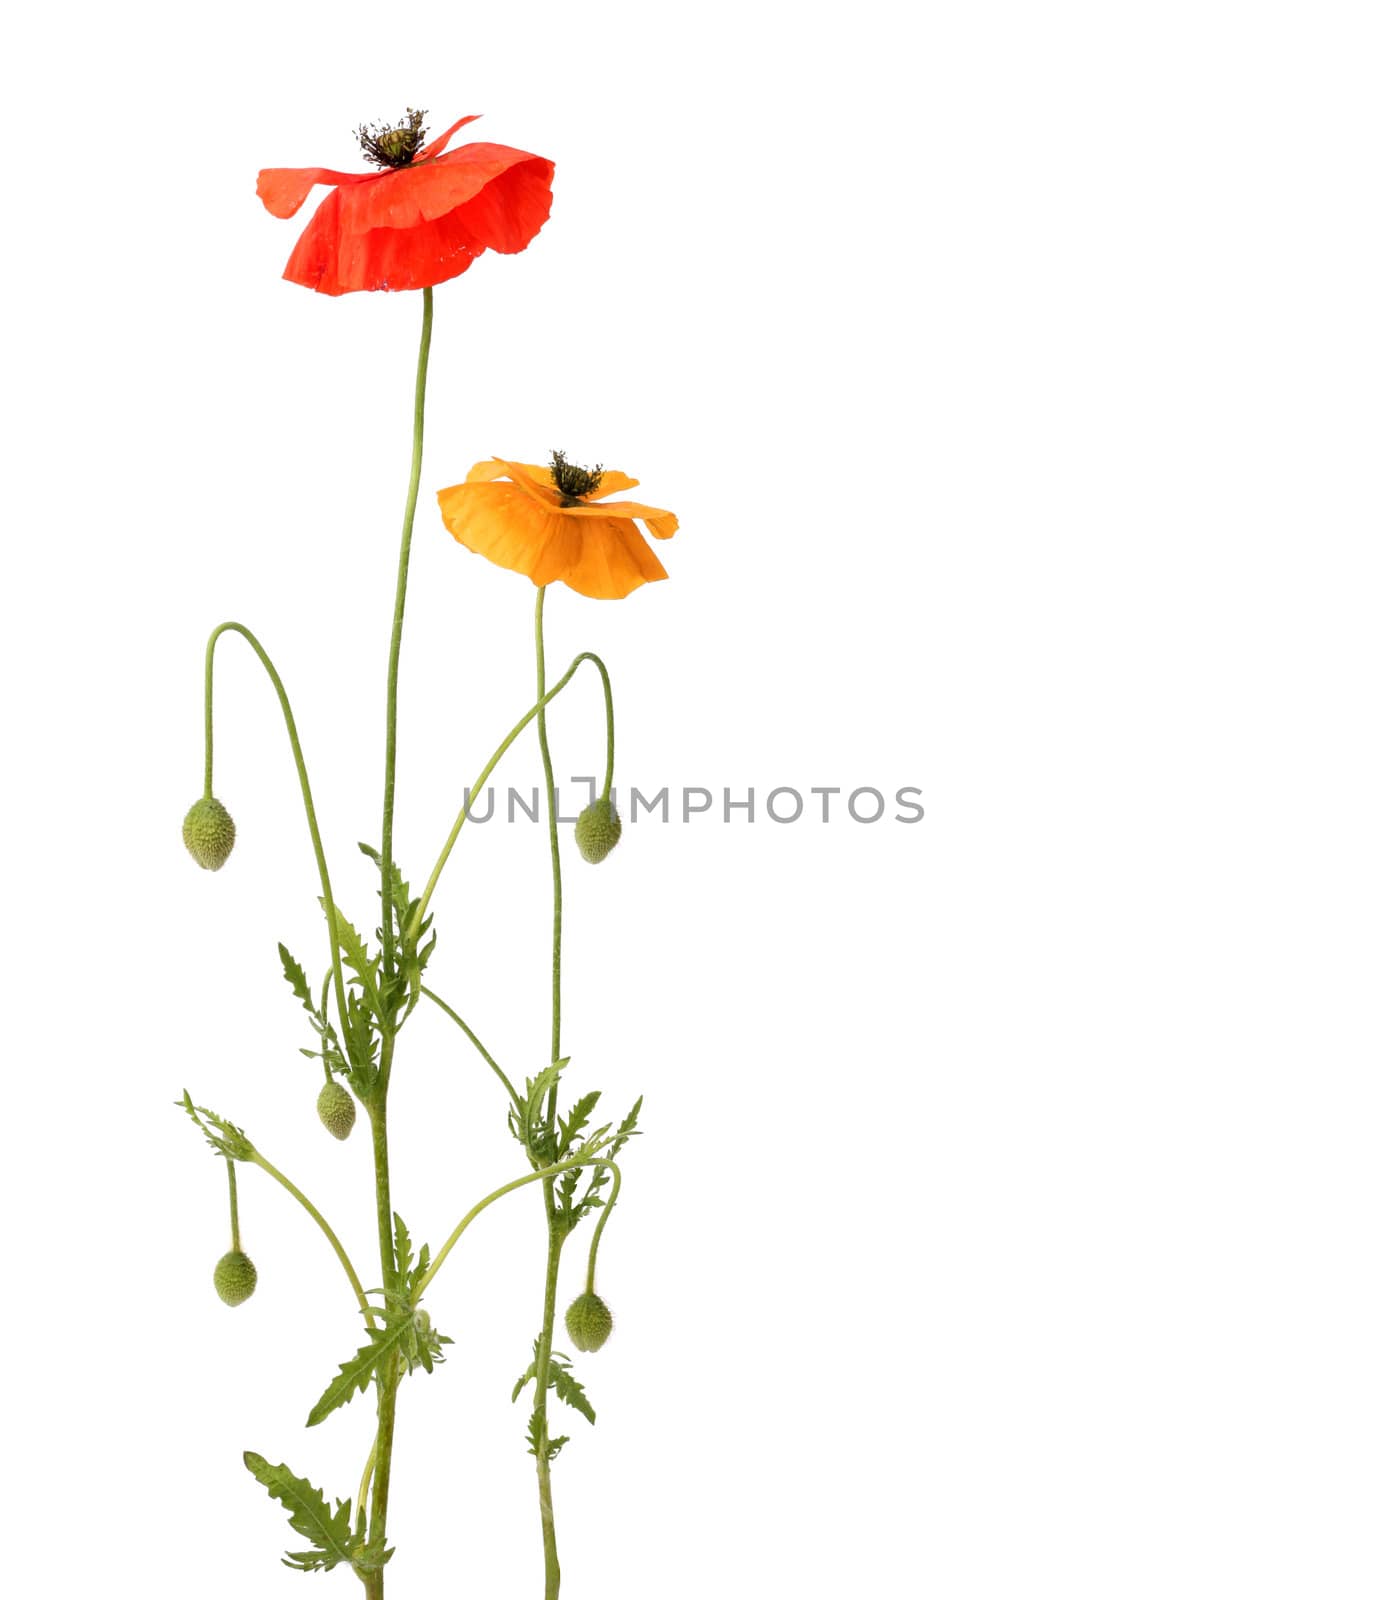 Red and yellow poppies isolated on white background